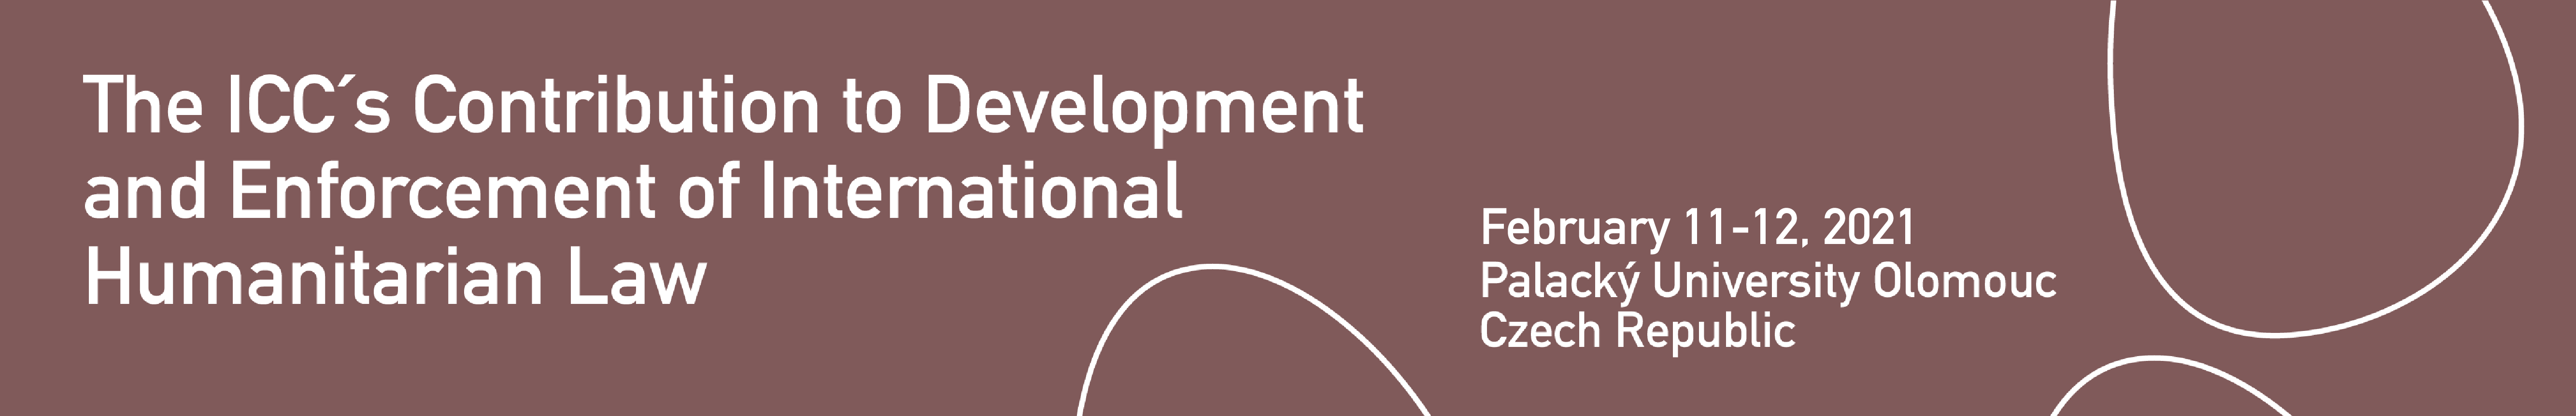 The ICC's Contribution to Development and Enforcement of International Humanitarian Law